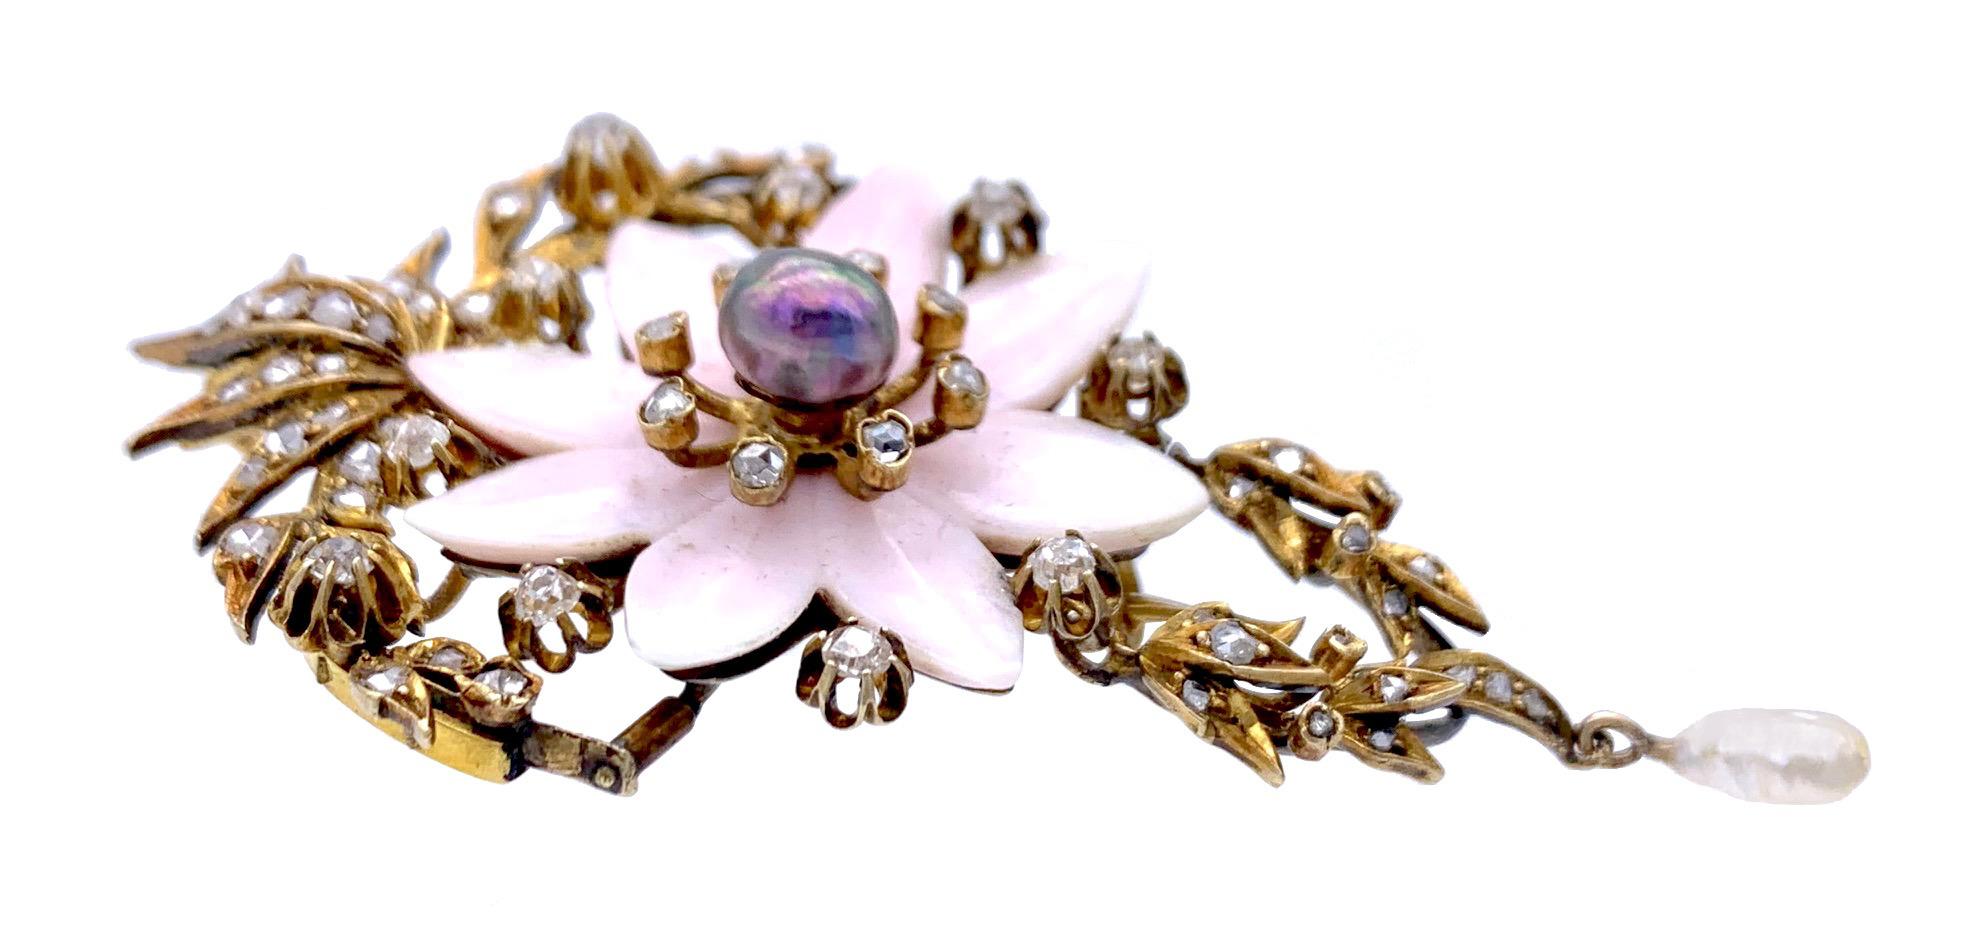 This elegant Belle Époque jewel was created out of 14 karat gold and can be worn as a pendant or a brooch. A natural black oriental pearl surrounded by diamond set pistils, delicate flower leaves carved out of pink shell and diamond set flower buds